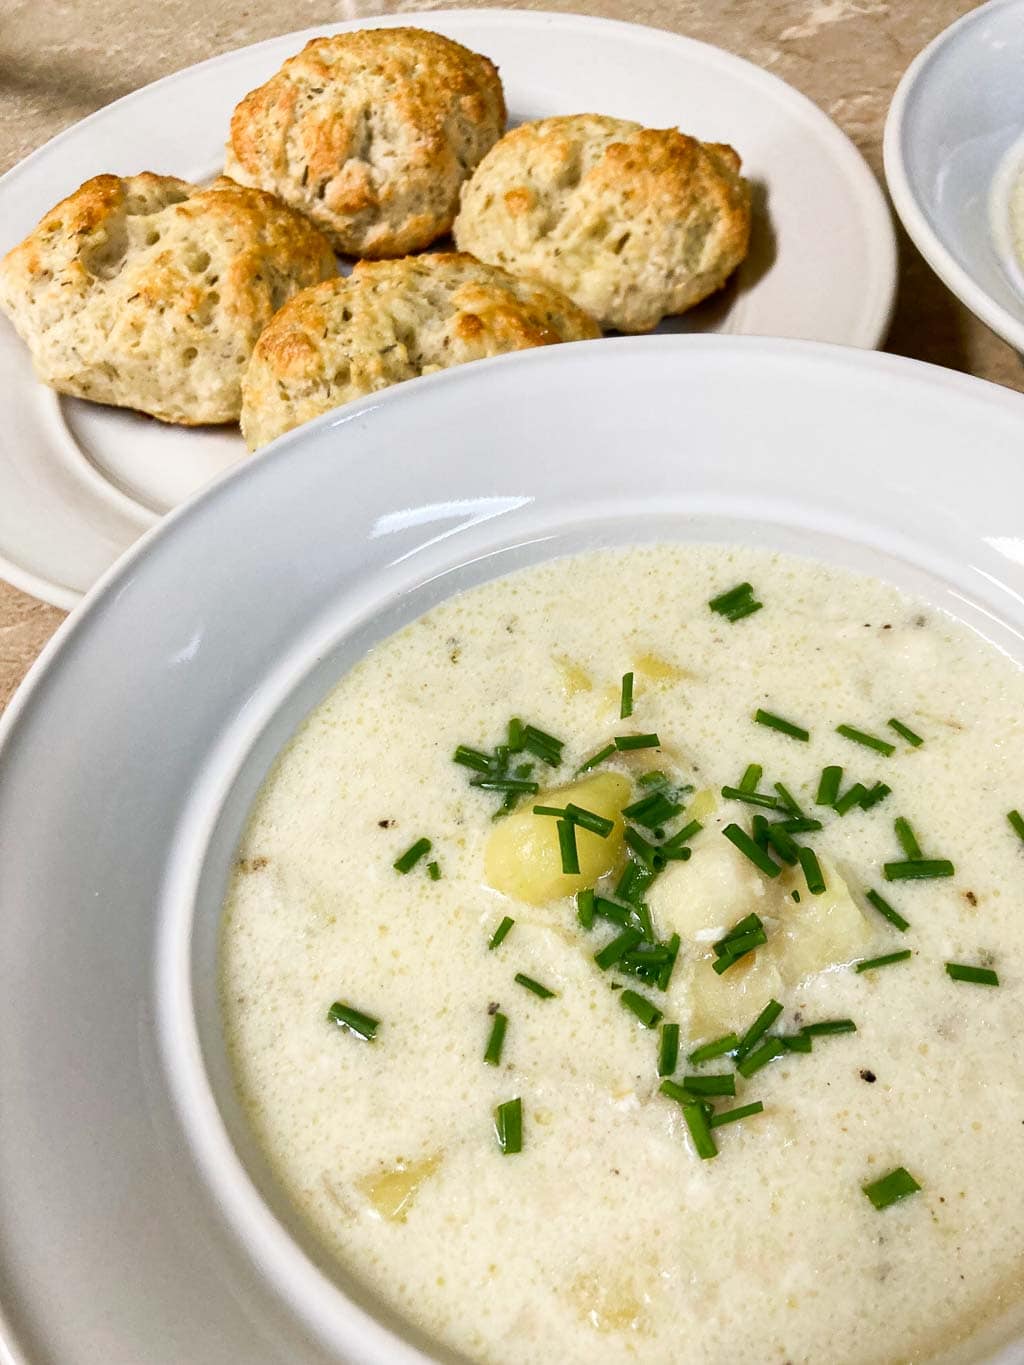 Cape Cod chowder recipe with thyme biscuits